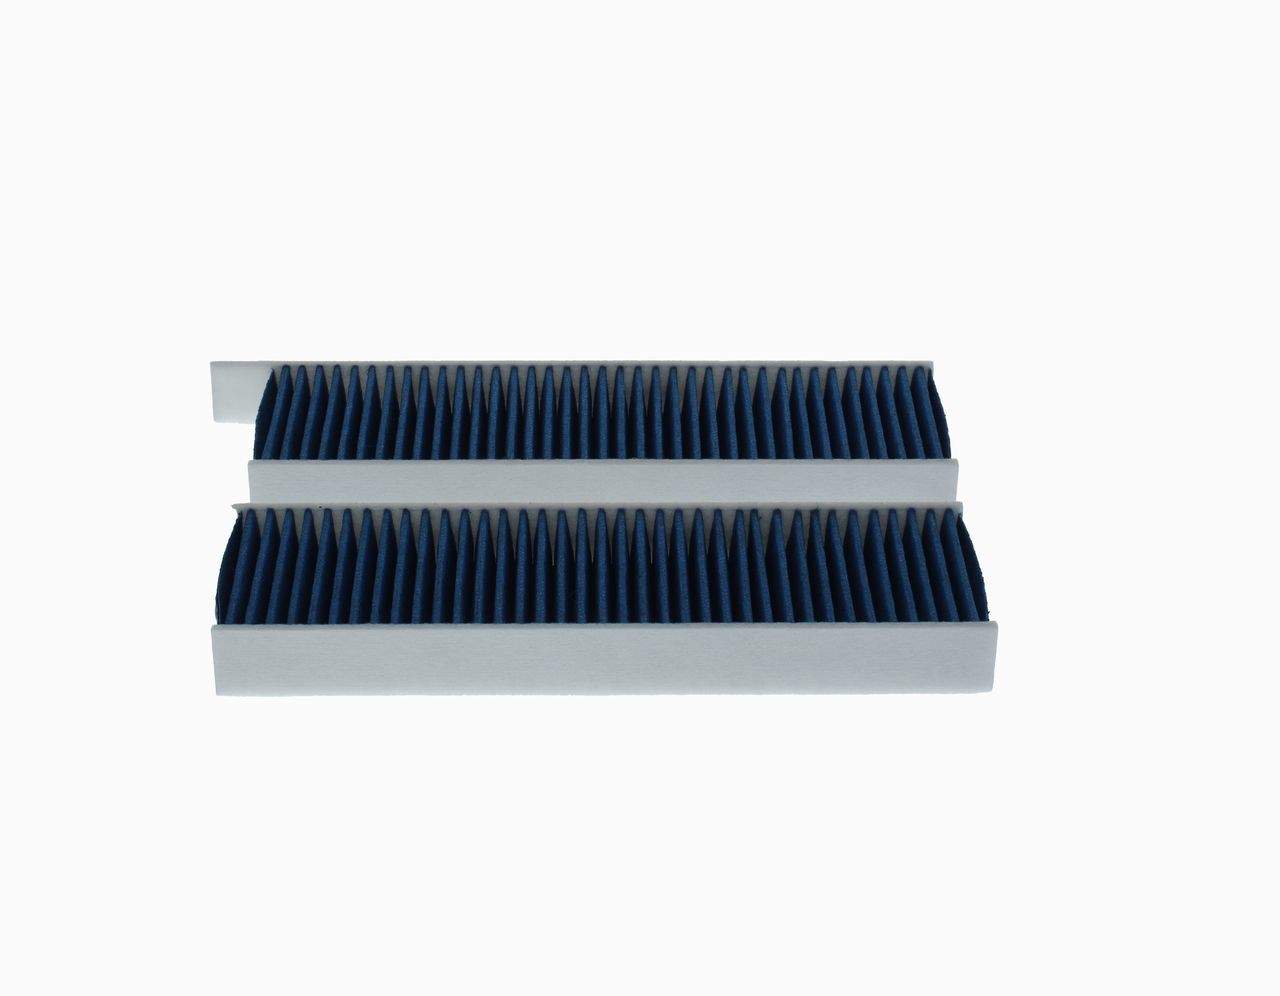 BOSCH 0986628610 Air conditioner filter Activated Carbon Filter, Particulate filter (PM 2.5), with anti-allergic effect, with fungicidal effect, with antibacterial action, 292 mm x 95 mm x 30 mm